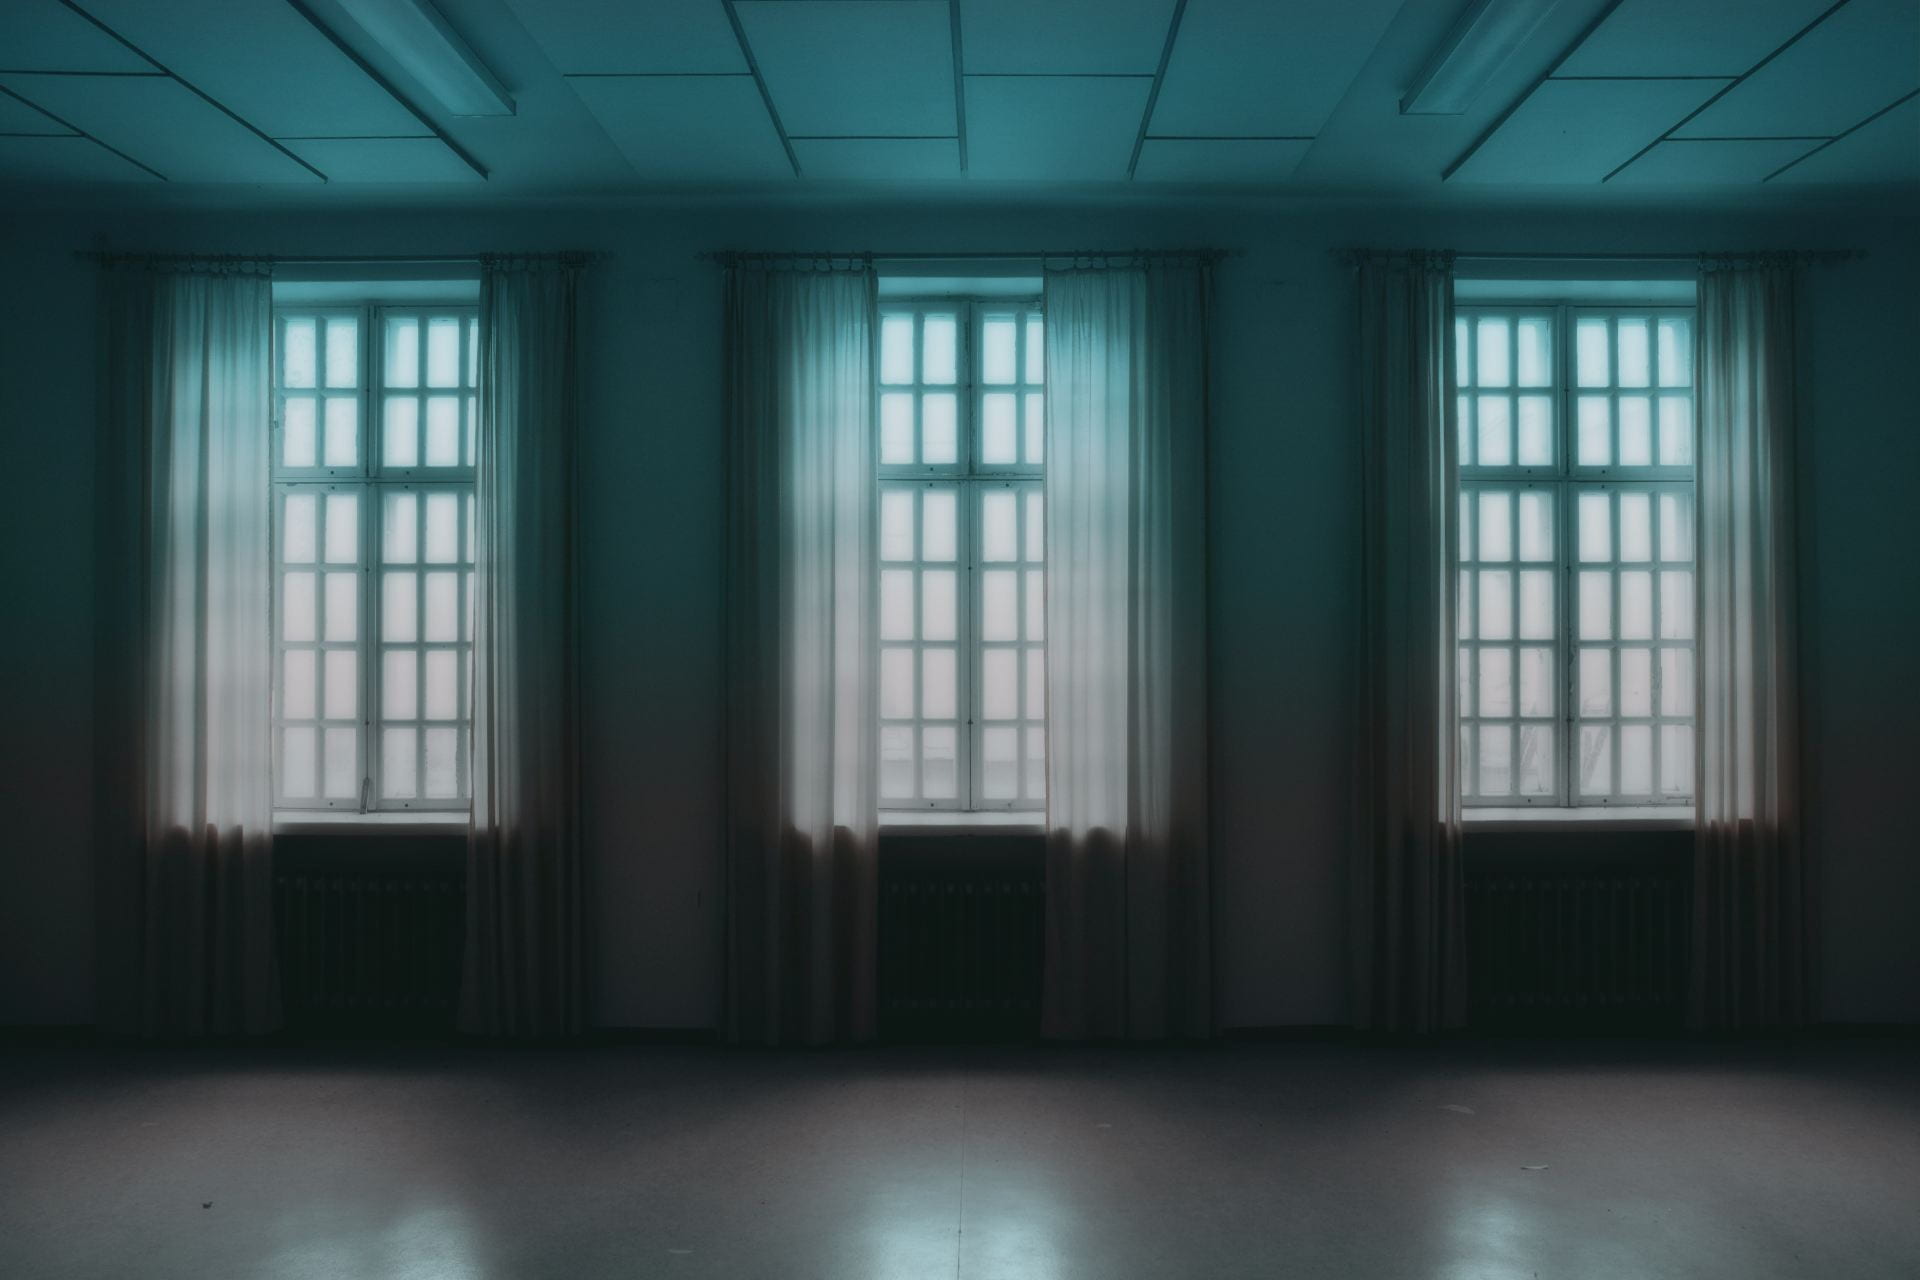 An empty room with three windows, all with long, sheer curtains. The two ceiling lights are off. Nothing but light can be seen outside the windows.